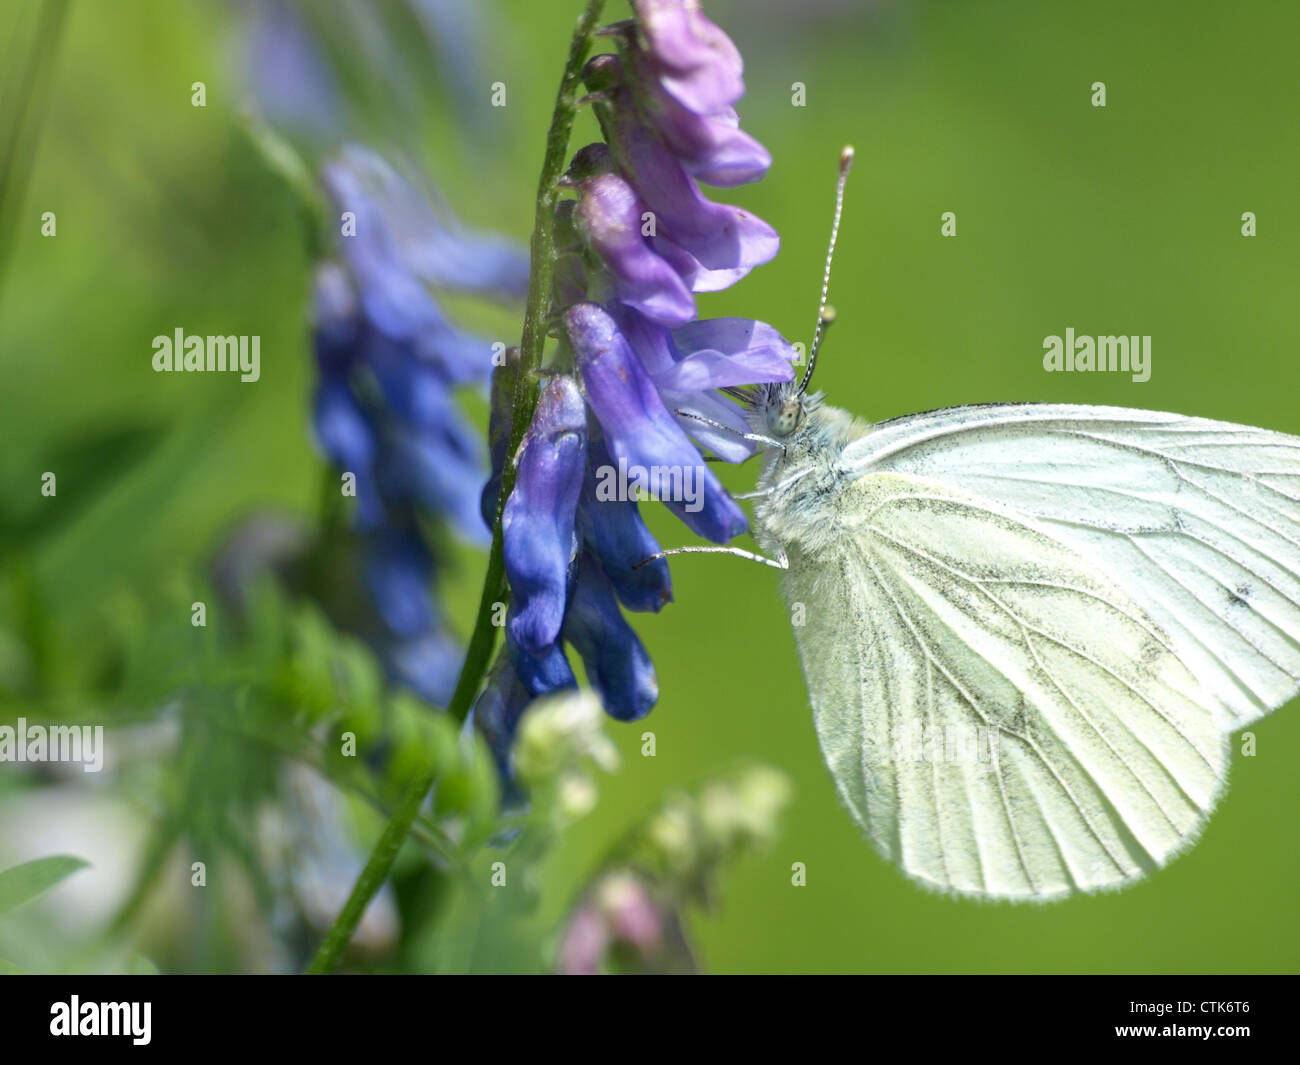 green-veined white on a tufted vetch / Pieris napi, Vicia cracca / Rapsweißling an Vogel-Wicke Stock Photo